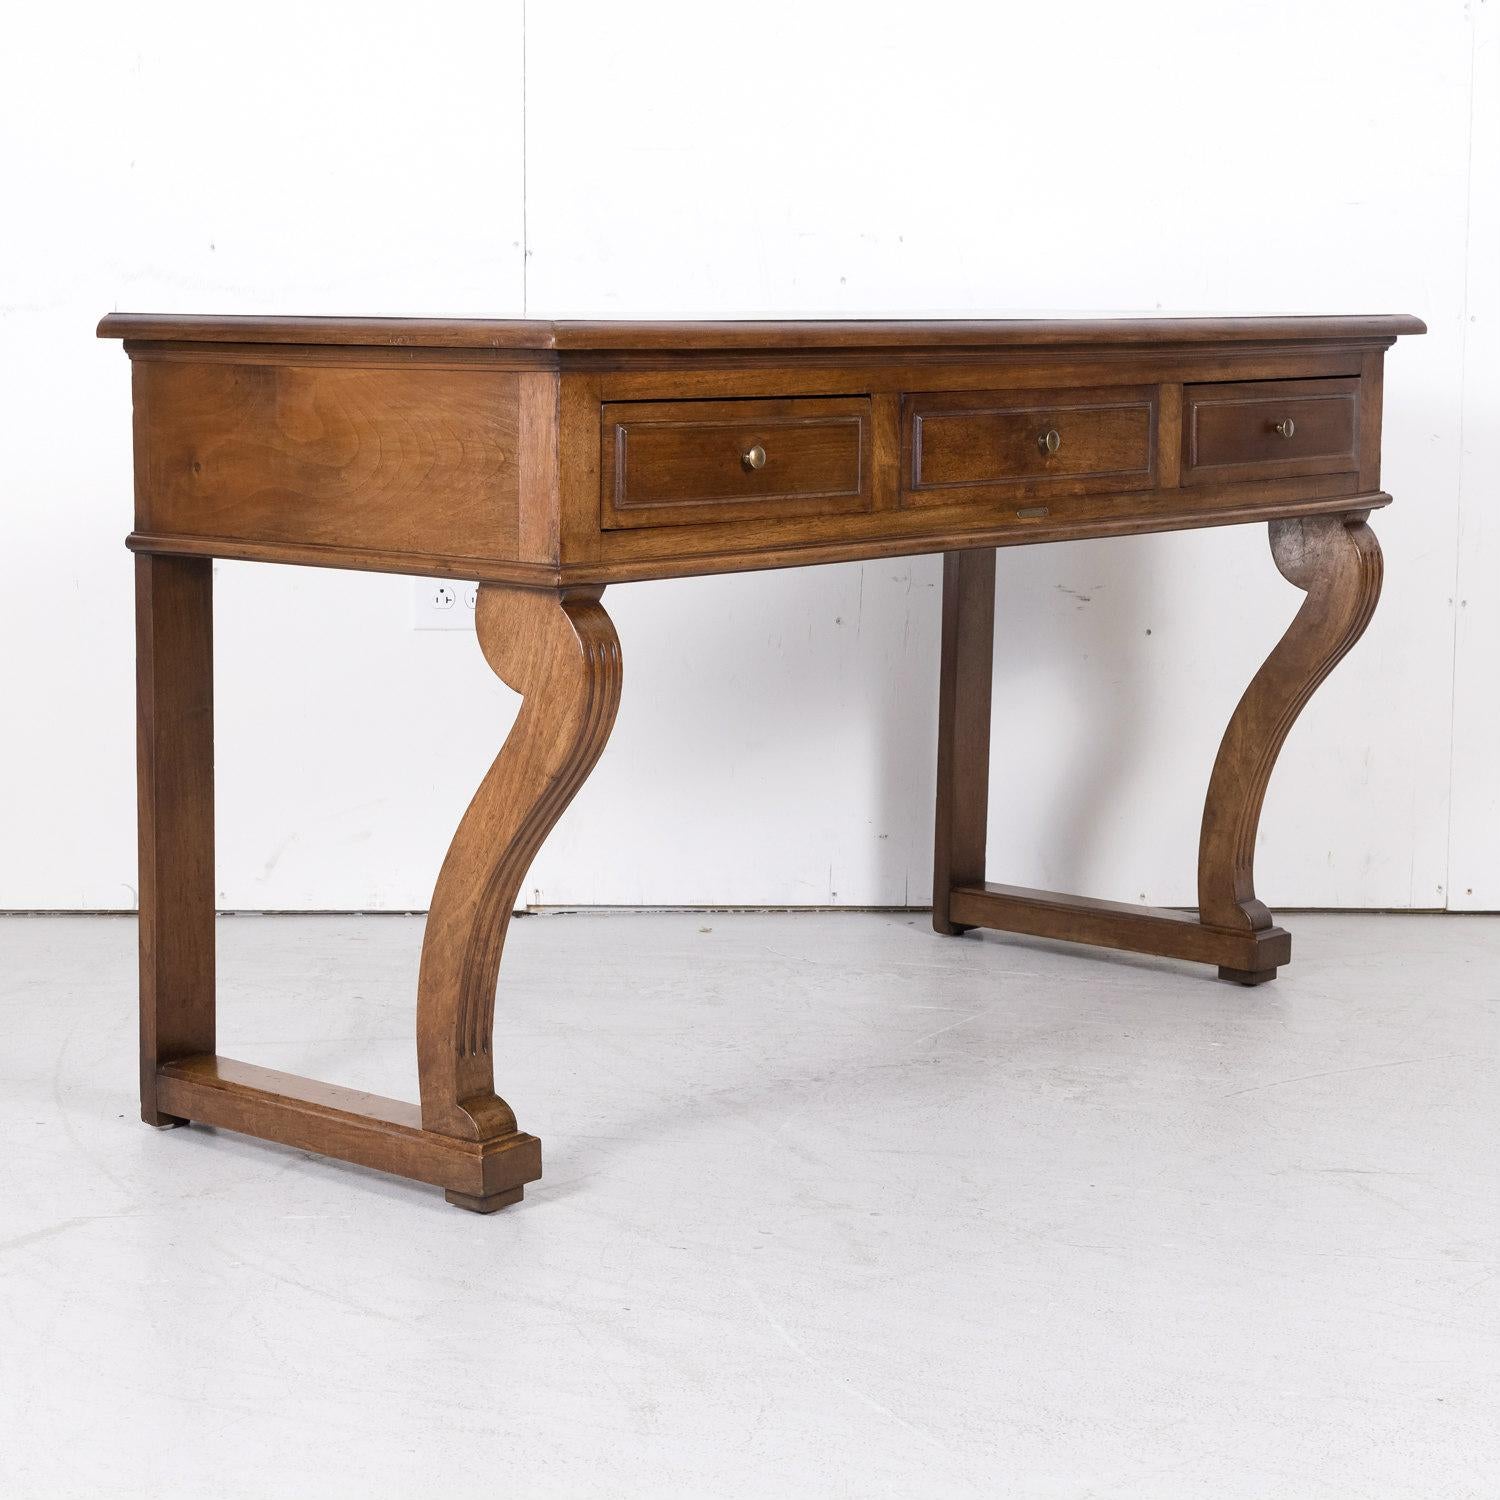 Handsome 19th century Charles X period wall console handcrafted of walnut in Lyon for the famous French parfumerie Vachon-Bavoux & Cie, circa 1820. A rectangular plank top sits above three drawers with the center drawer having the bronze plate